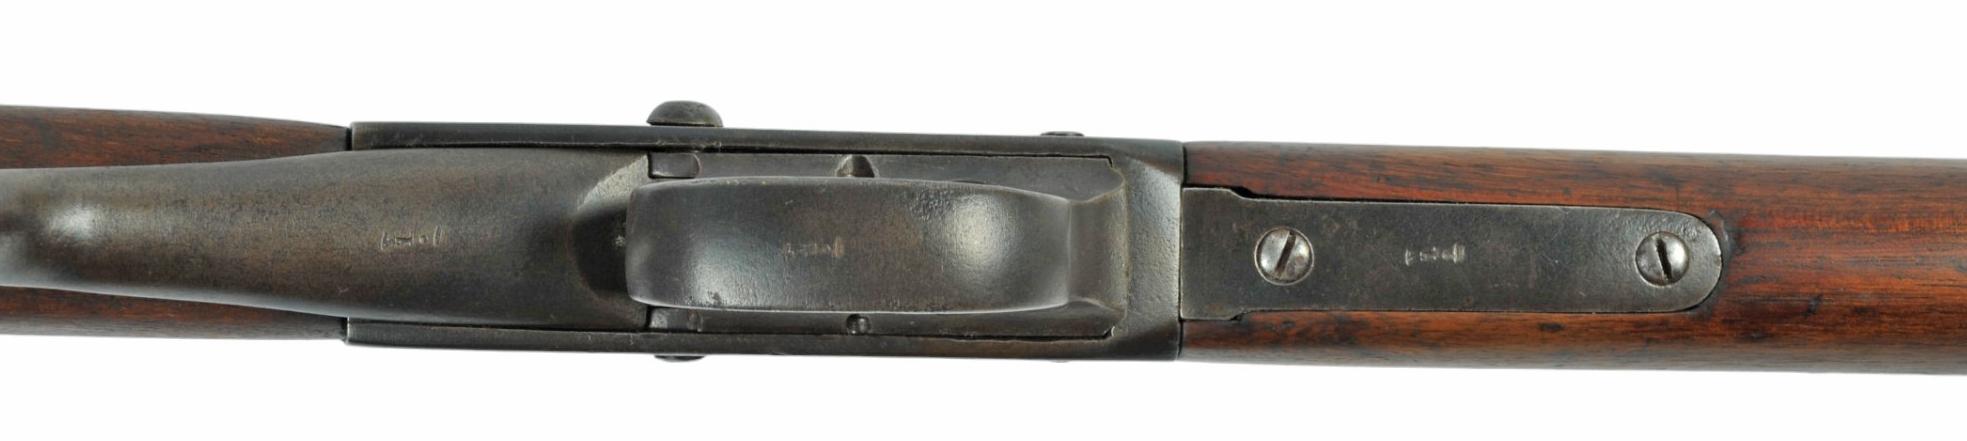 Rare Afghani MK-II 450/577 Martini-Henry Lever-Action Carbine - Antique - no FFL required (JRW1)